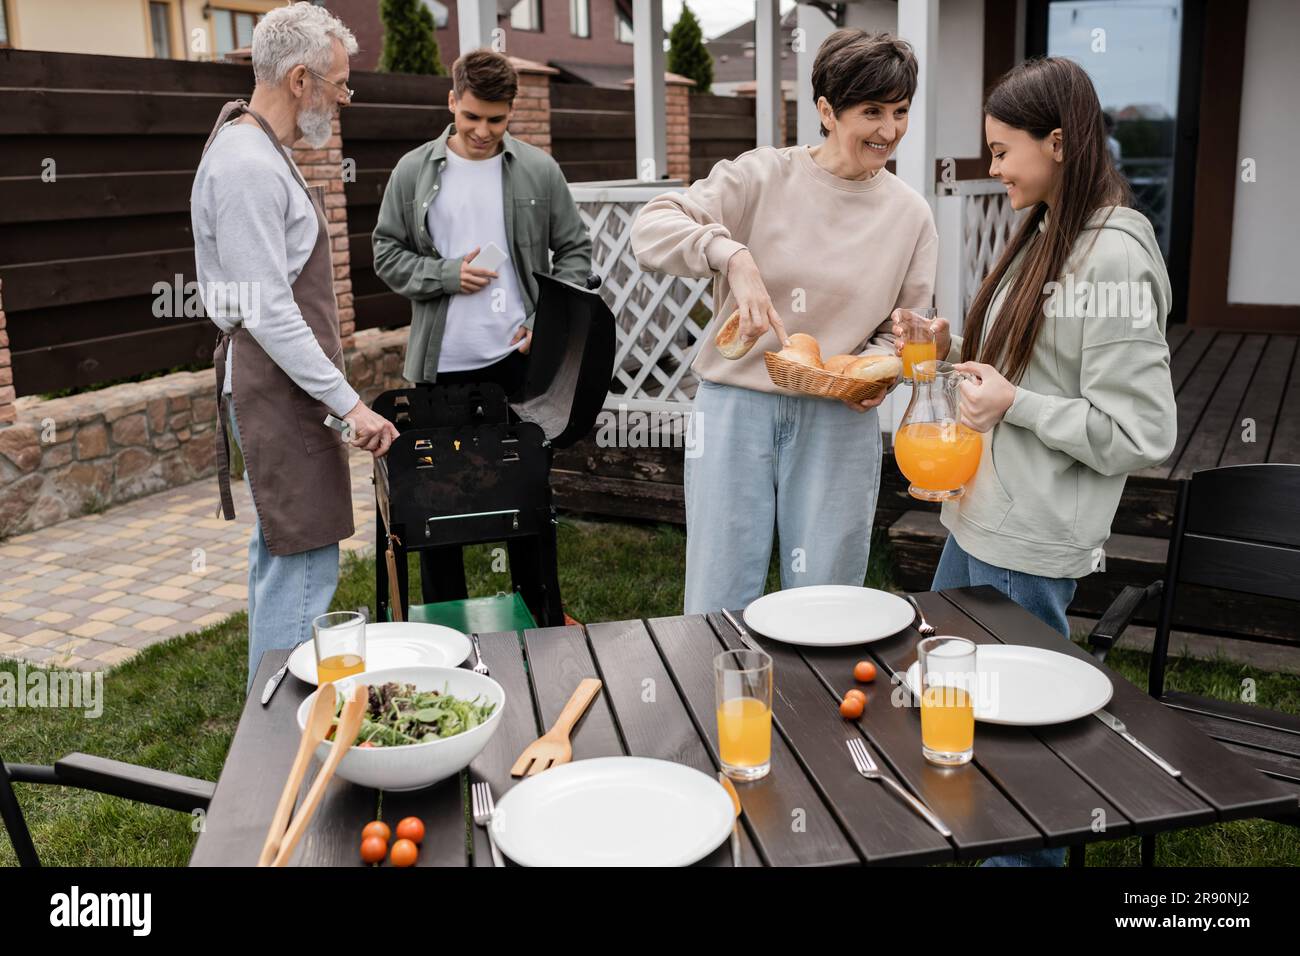 celebration of parents` day, middle aged mother showing buns to teenage daughter with jug of orange juice, father and son preparing food on bbq grill, Stock Photo